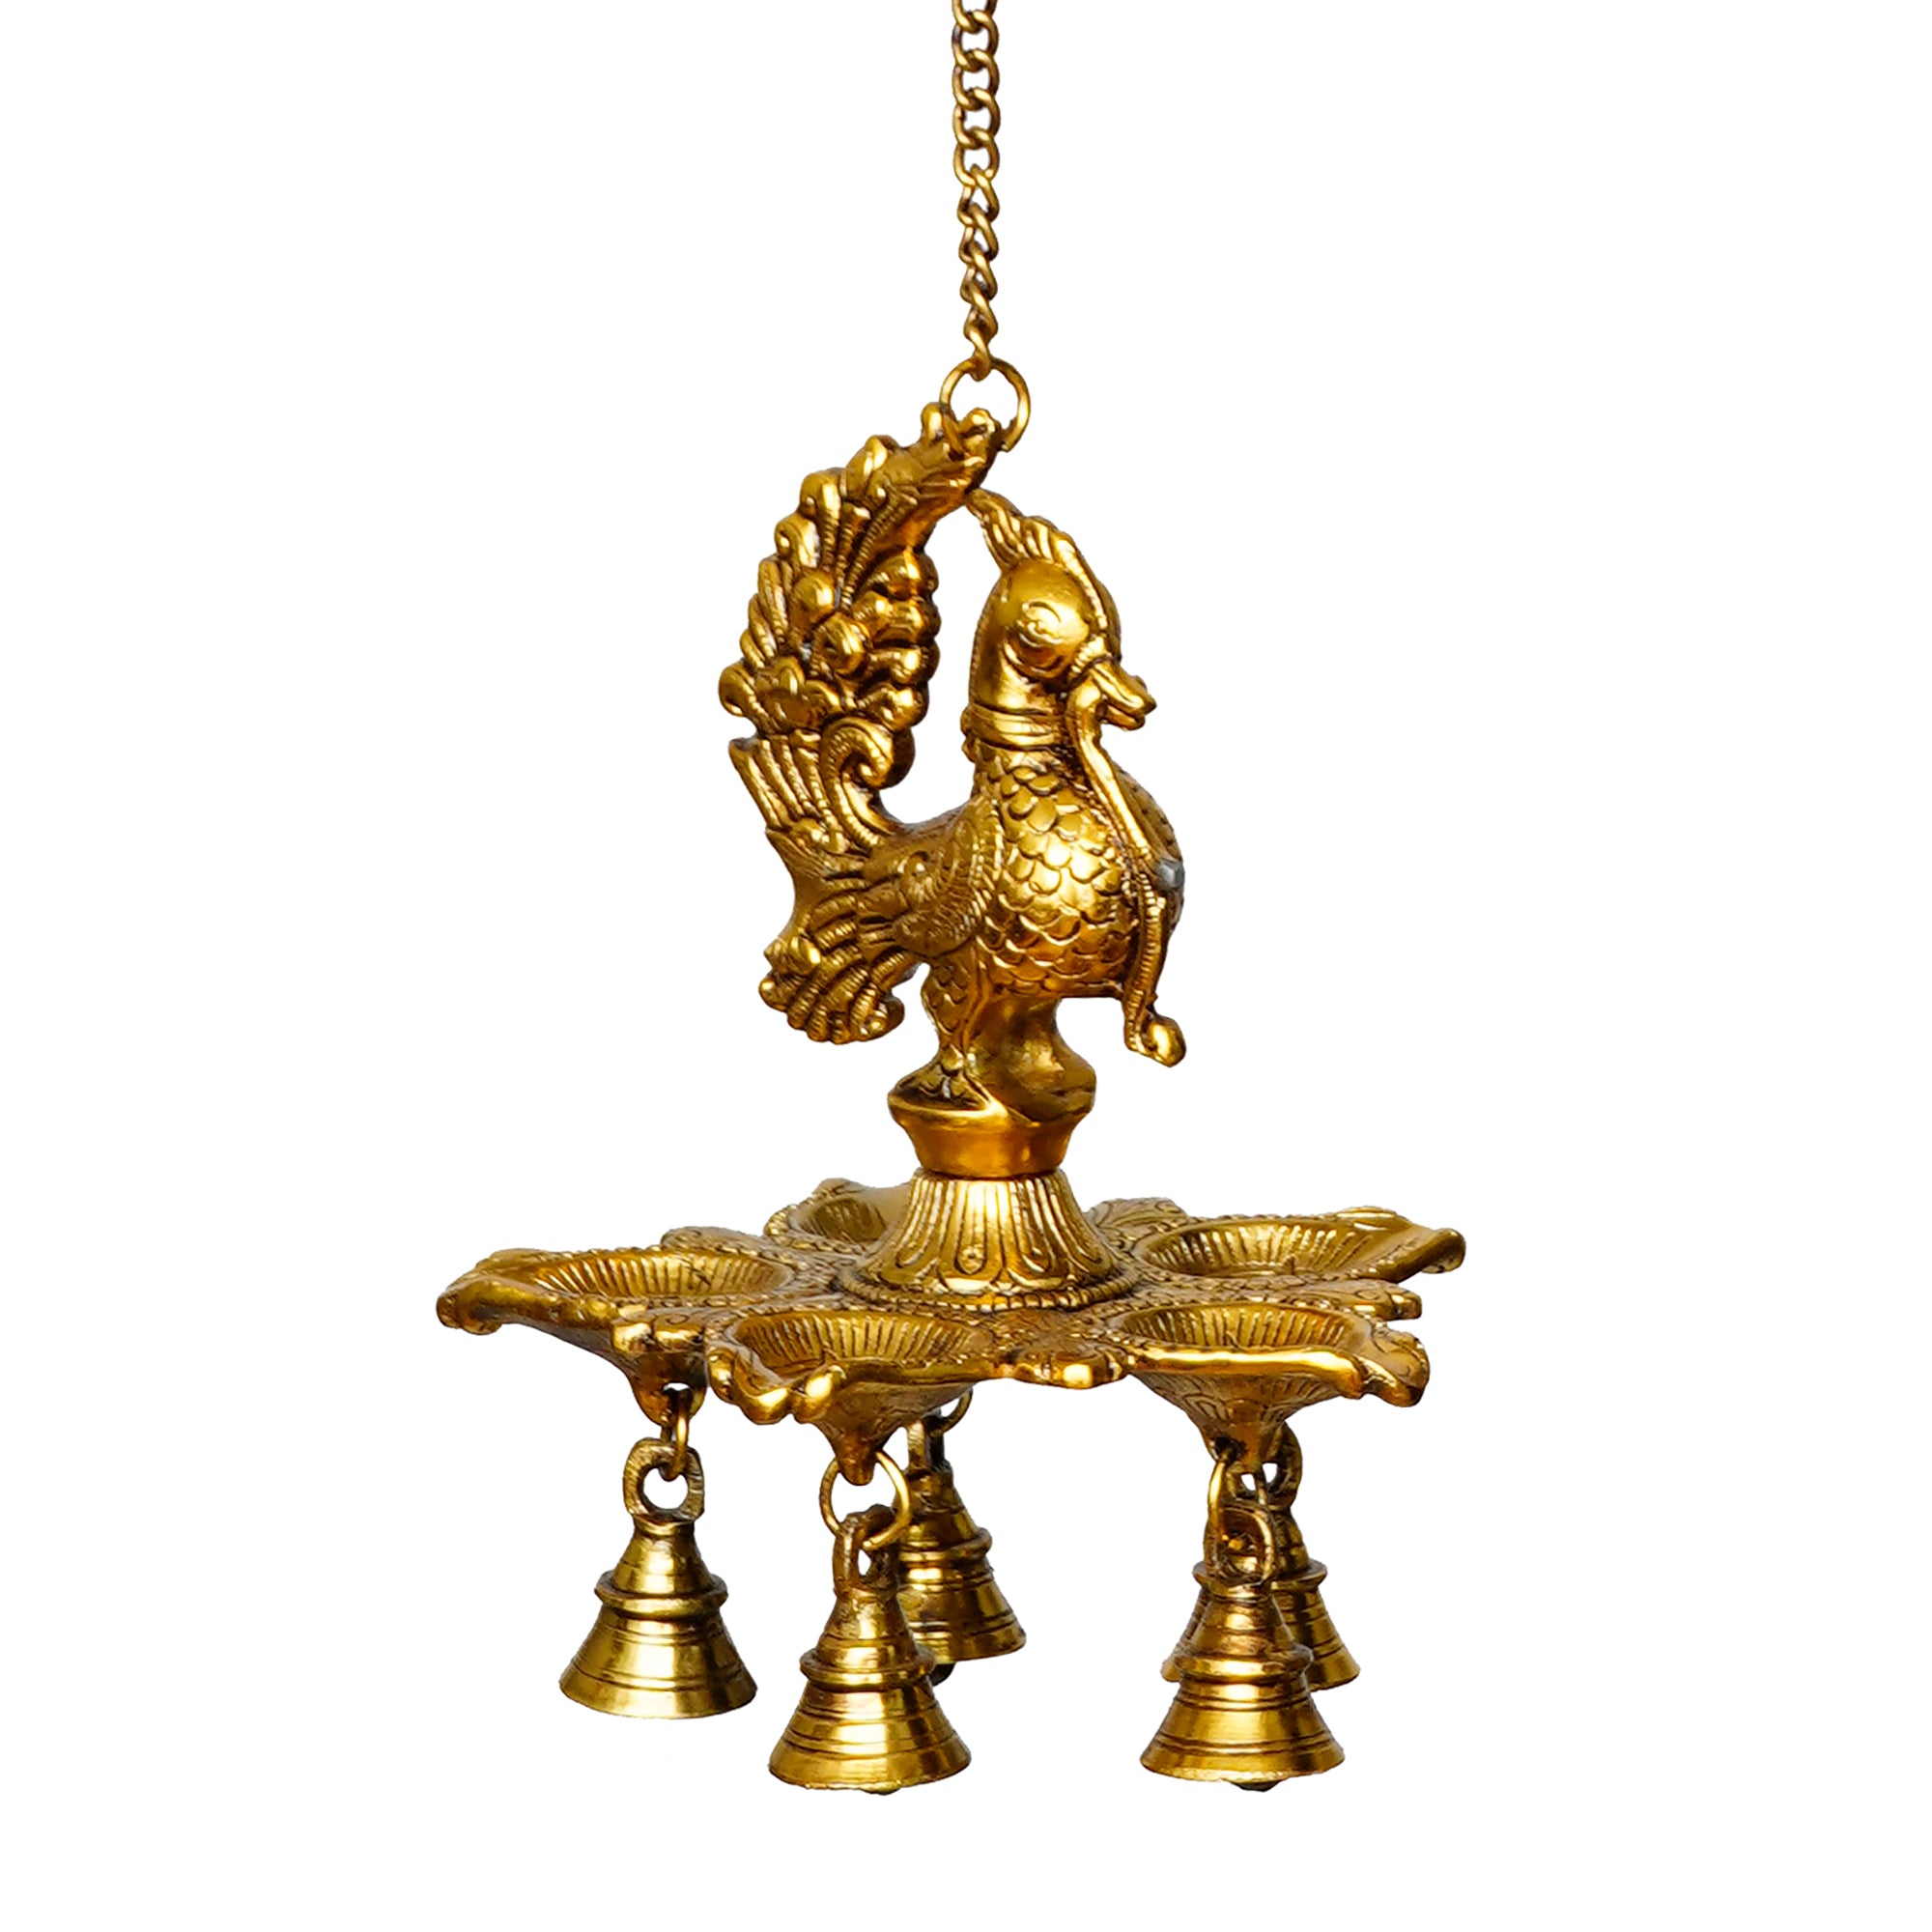 Five Wicks Decorative Peacock Diya With Bell Metal Wall Hanging With Chain 4